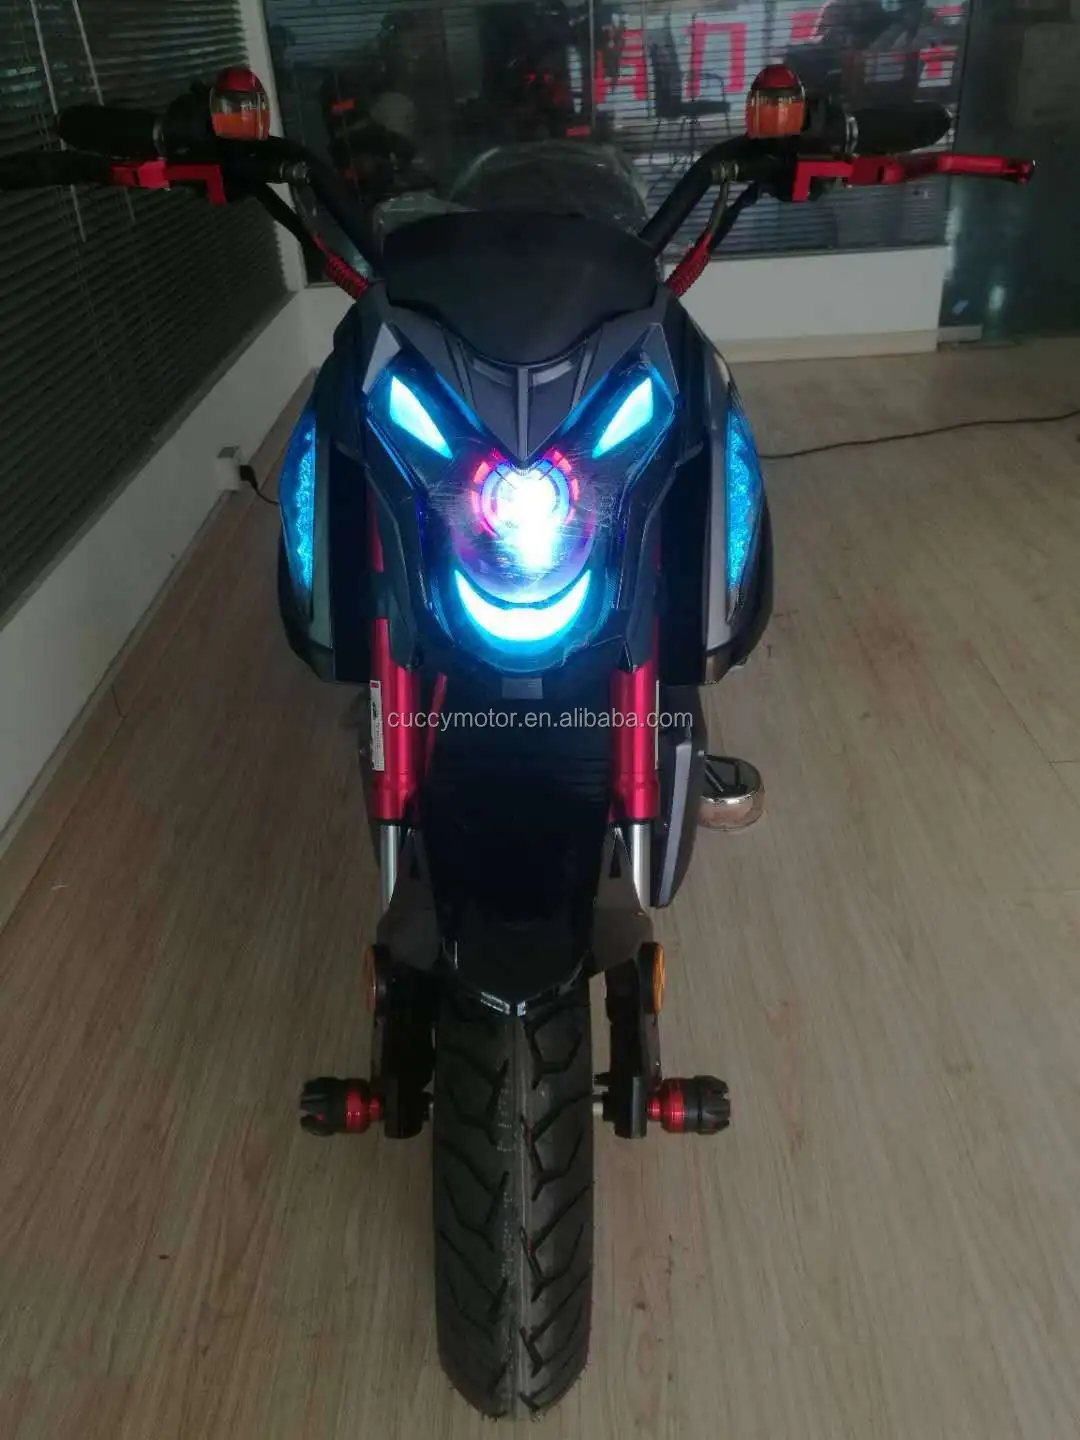 2000w 1500w 1000w Unico Motos Electricas Aguila Ava Electric Motorcycle  Racing,Dc Motor Ebike,Adult Electric Motorbike - Buy Adults Electric  Motorbike,Motorbike Electric Adult,Electric Motorbike Adult Product on  